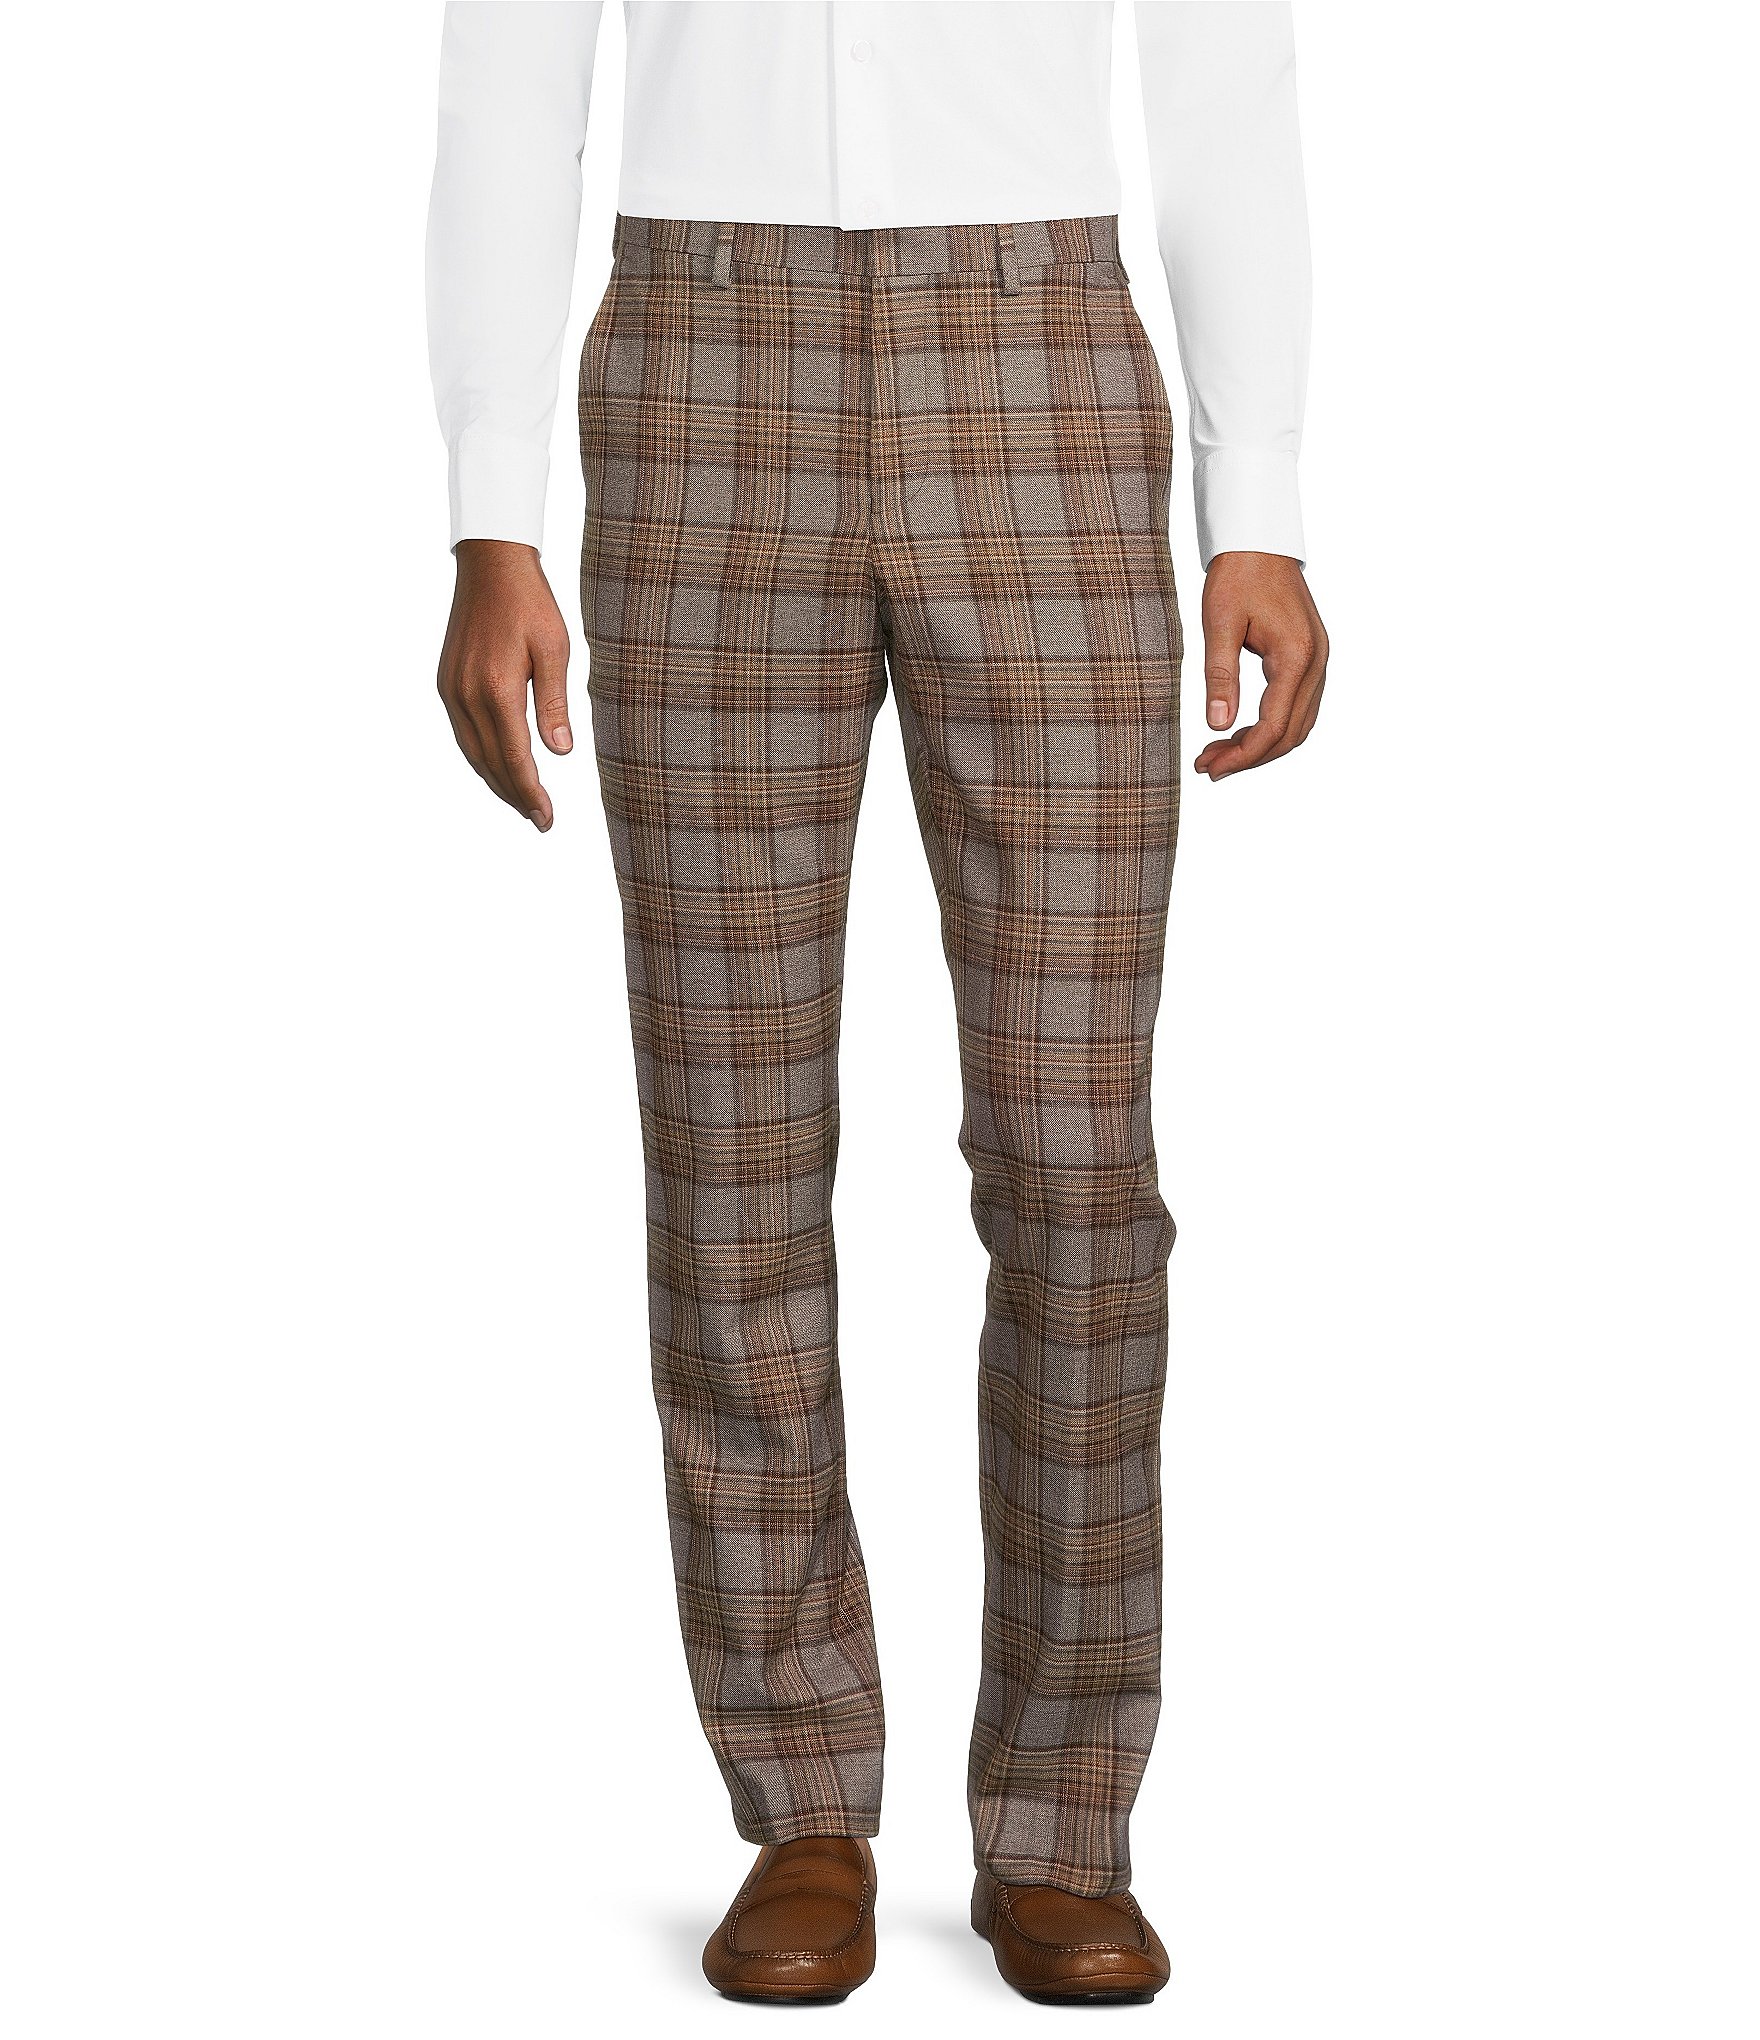 fvwitlyh Pants for Men Mens Plaid Pants Slim Tapered Fit Casual Stretch  Flat-Front Expandable Waist Checkered Dress Pants 